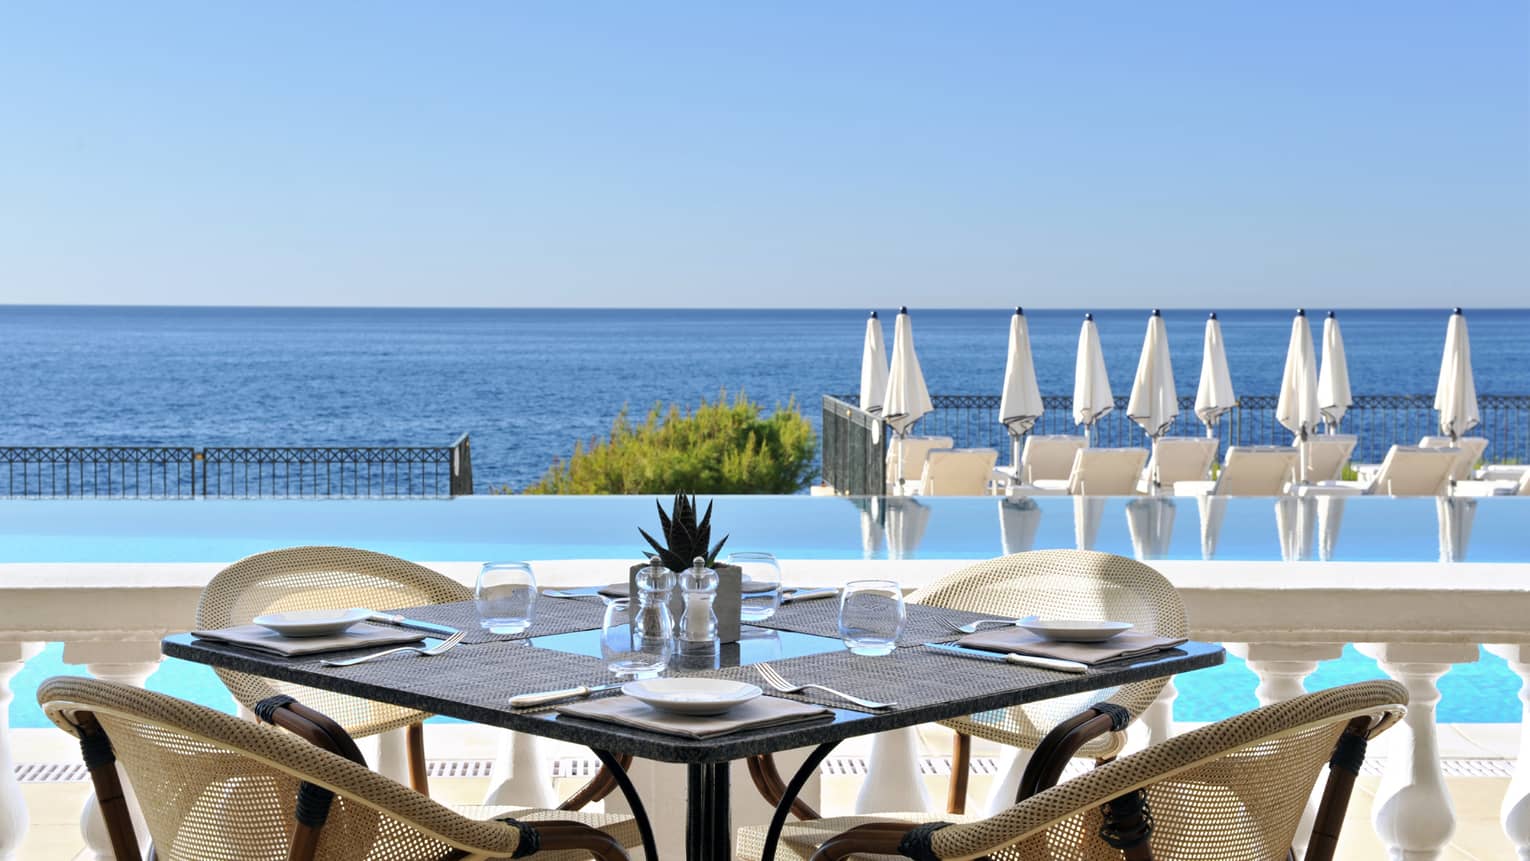 Club Dauphin patio table, chairs by outdoor swimming pool, blue sea